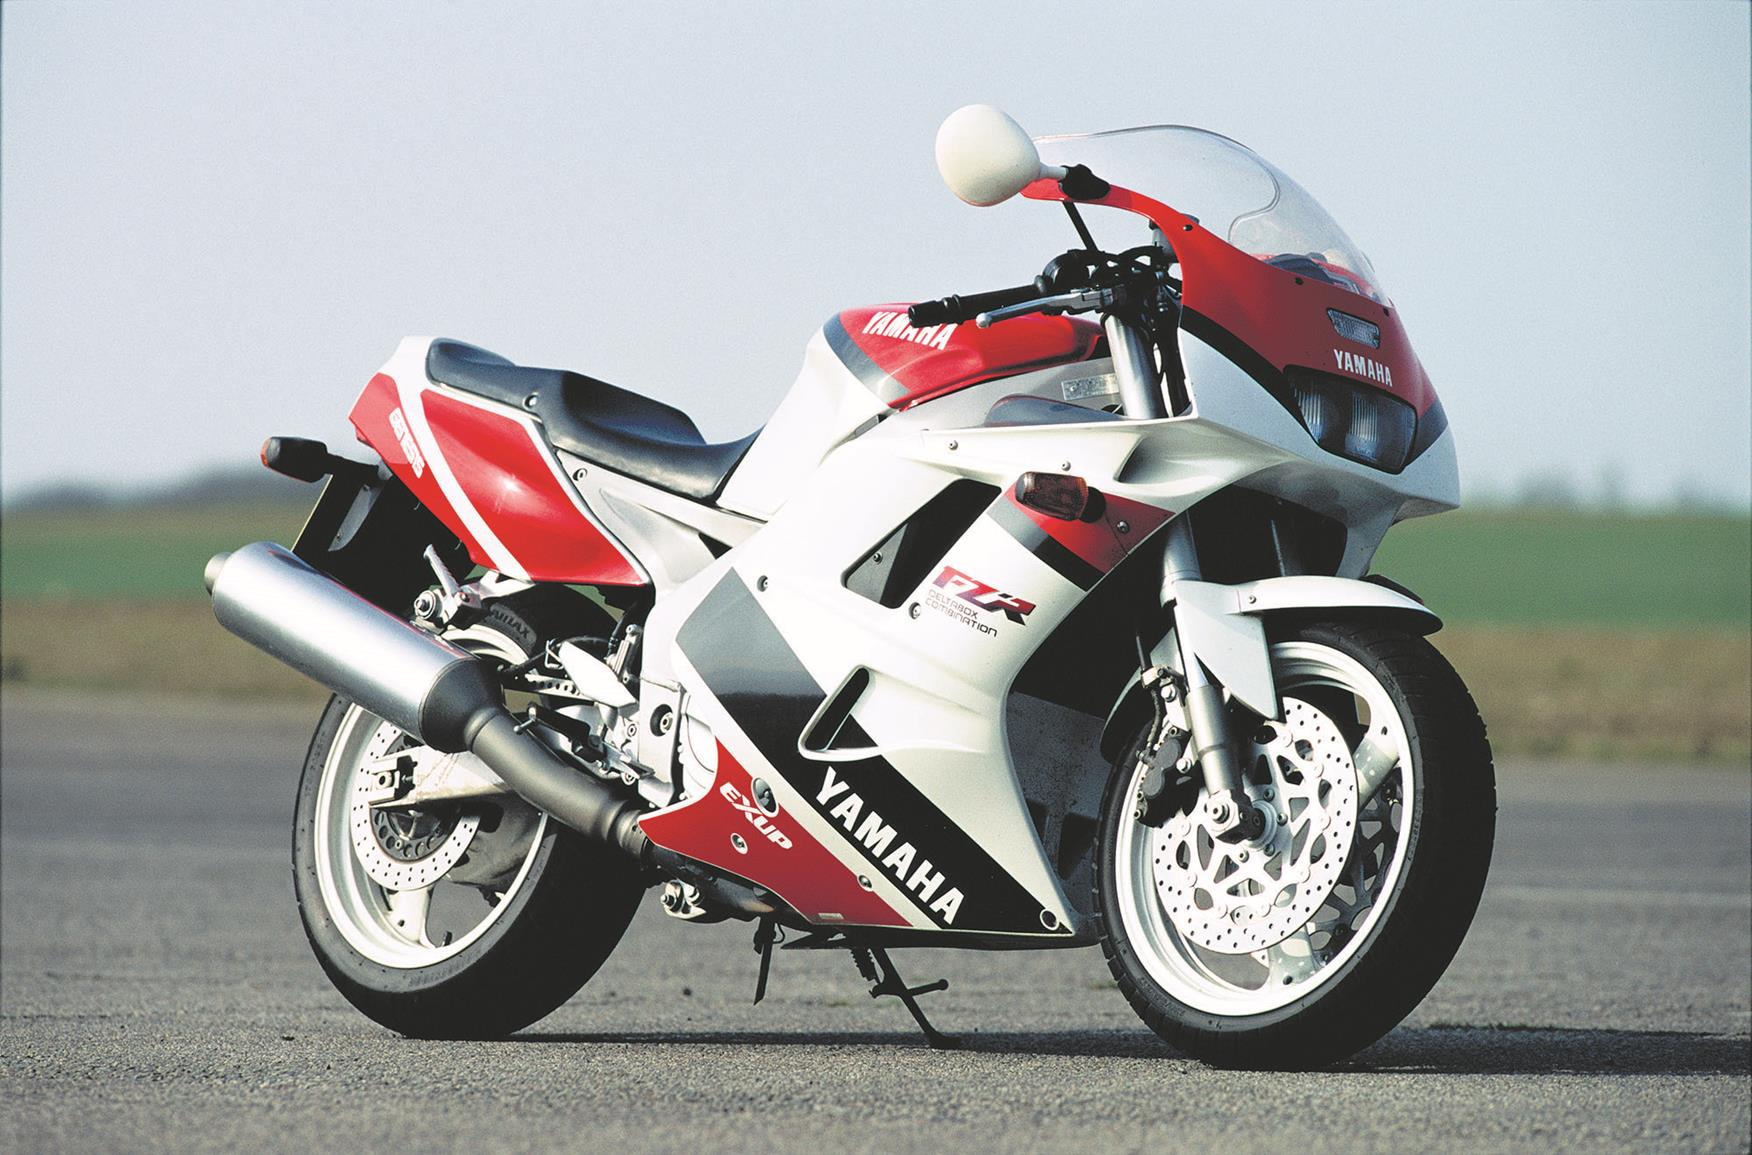 YAMAHA FZR1000 (1991-1994) Review | Speed, Specs & Prices